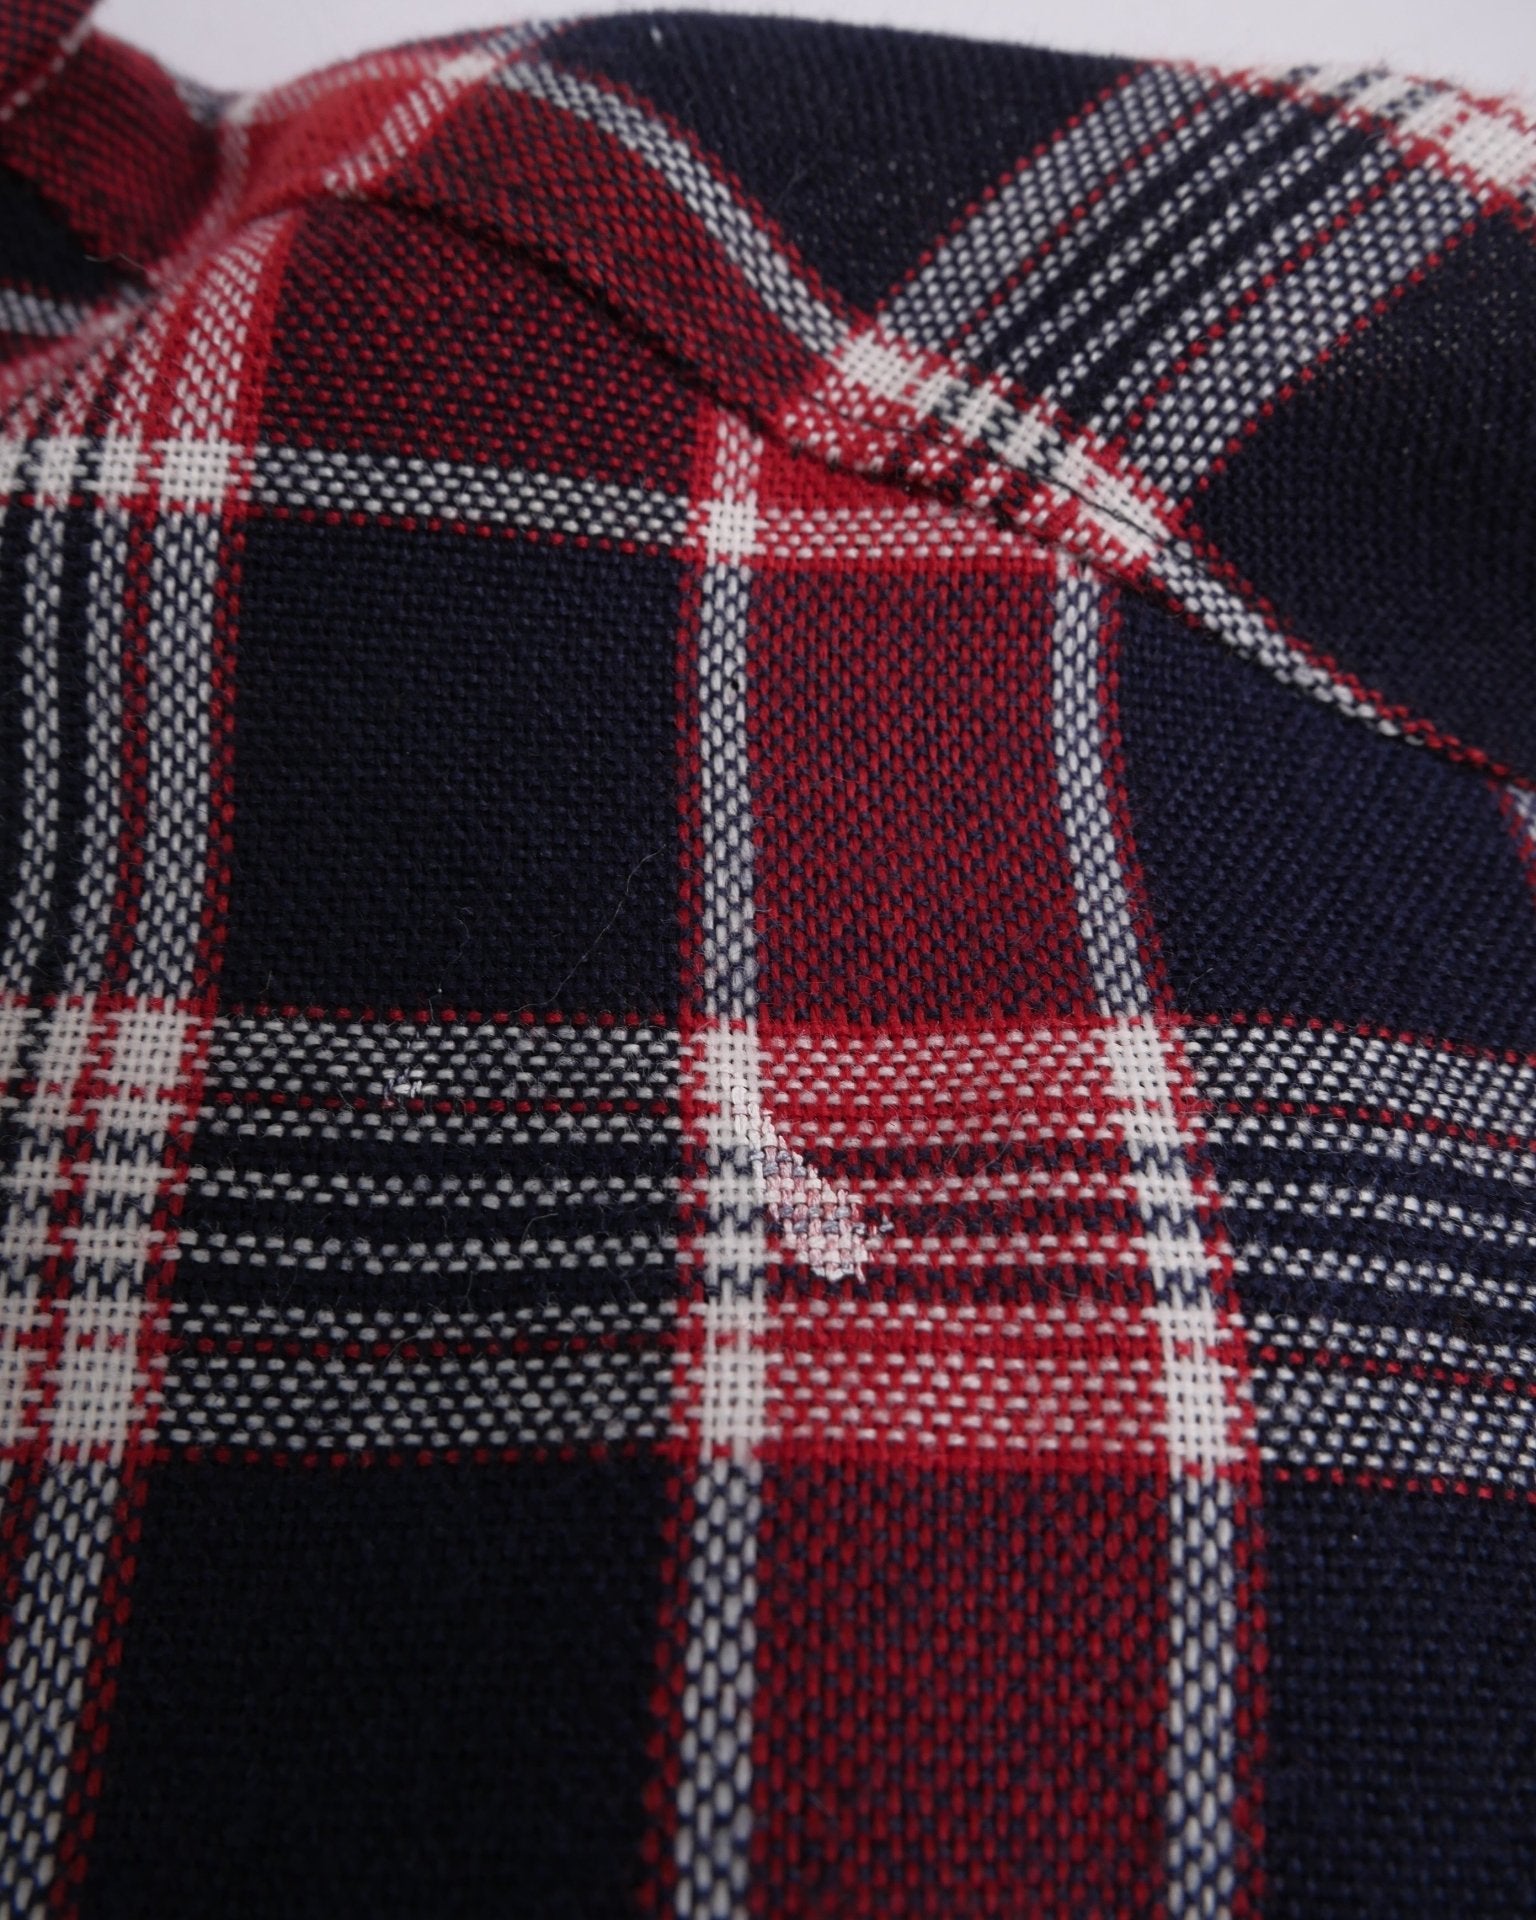 Vintage blue red checkered Flannel Langarm Hemd - Peeces